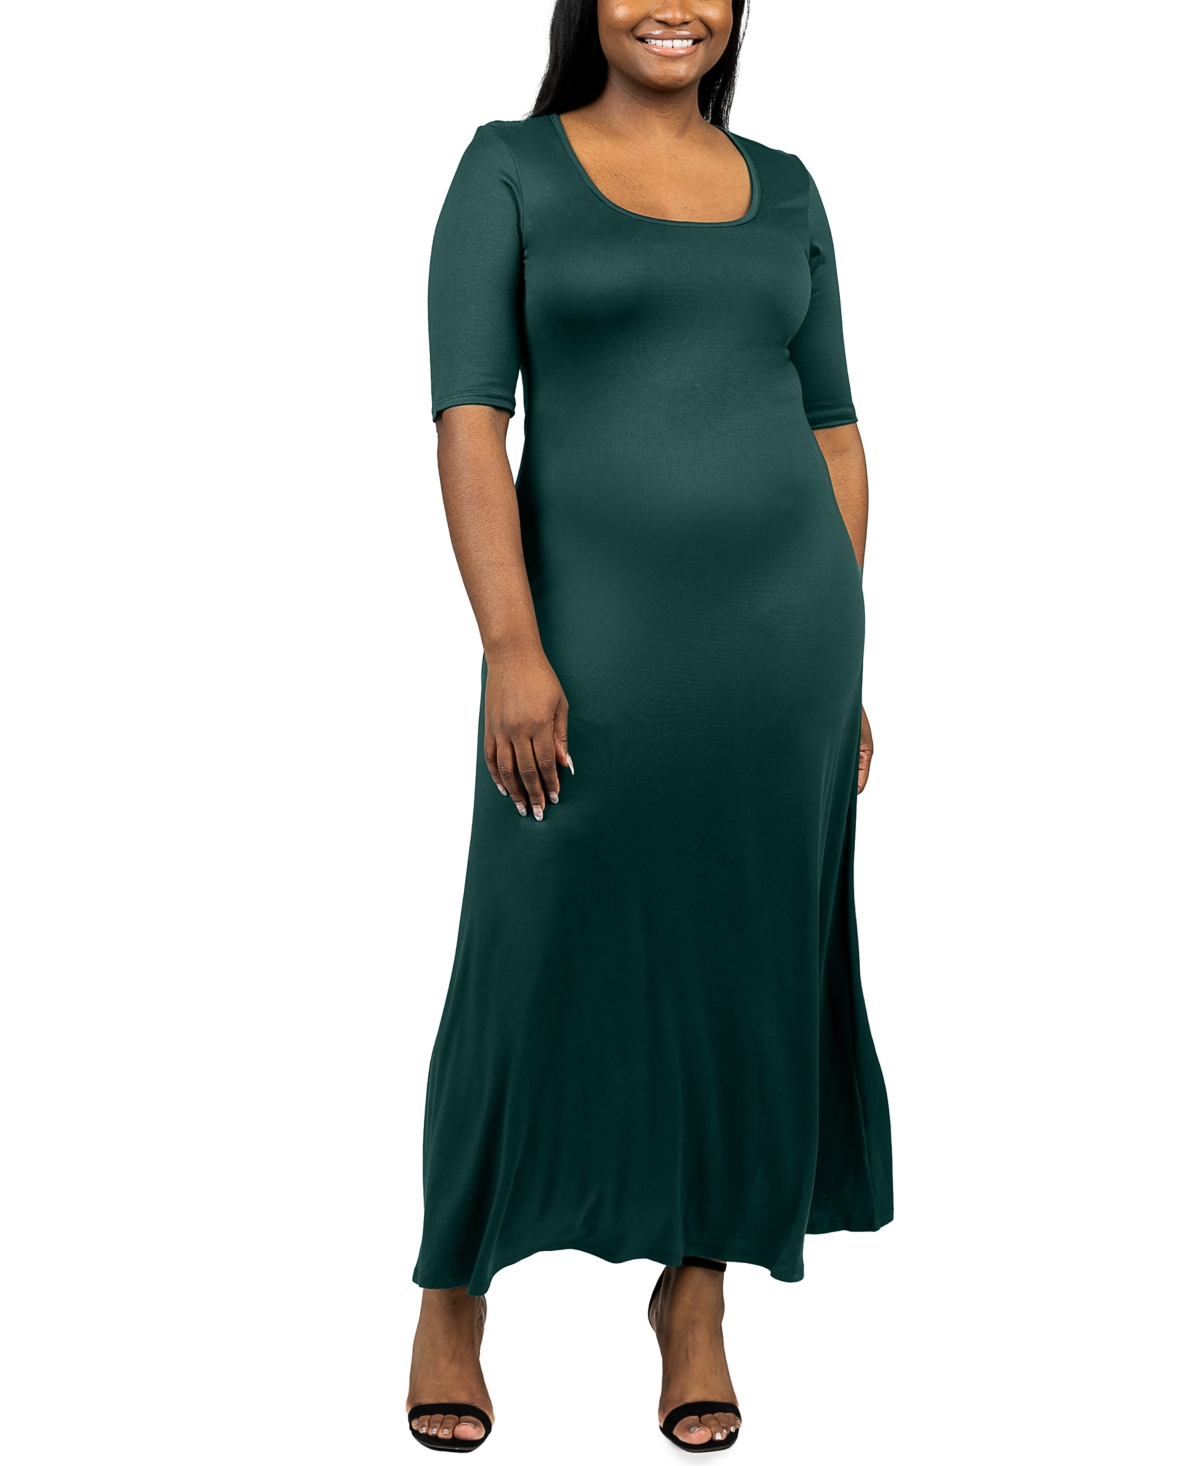 24seven Comfort Apparel Plus Size Elbow Length Sleeve Maxi Dress In Green